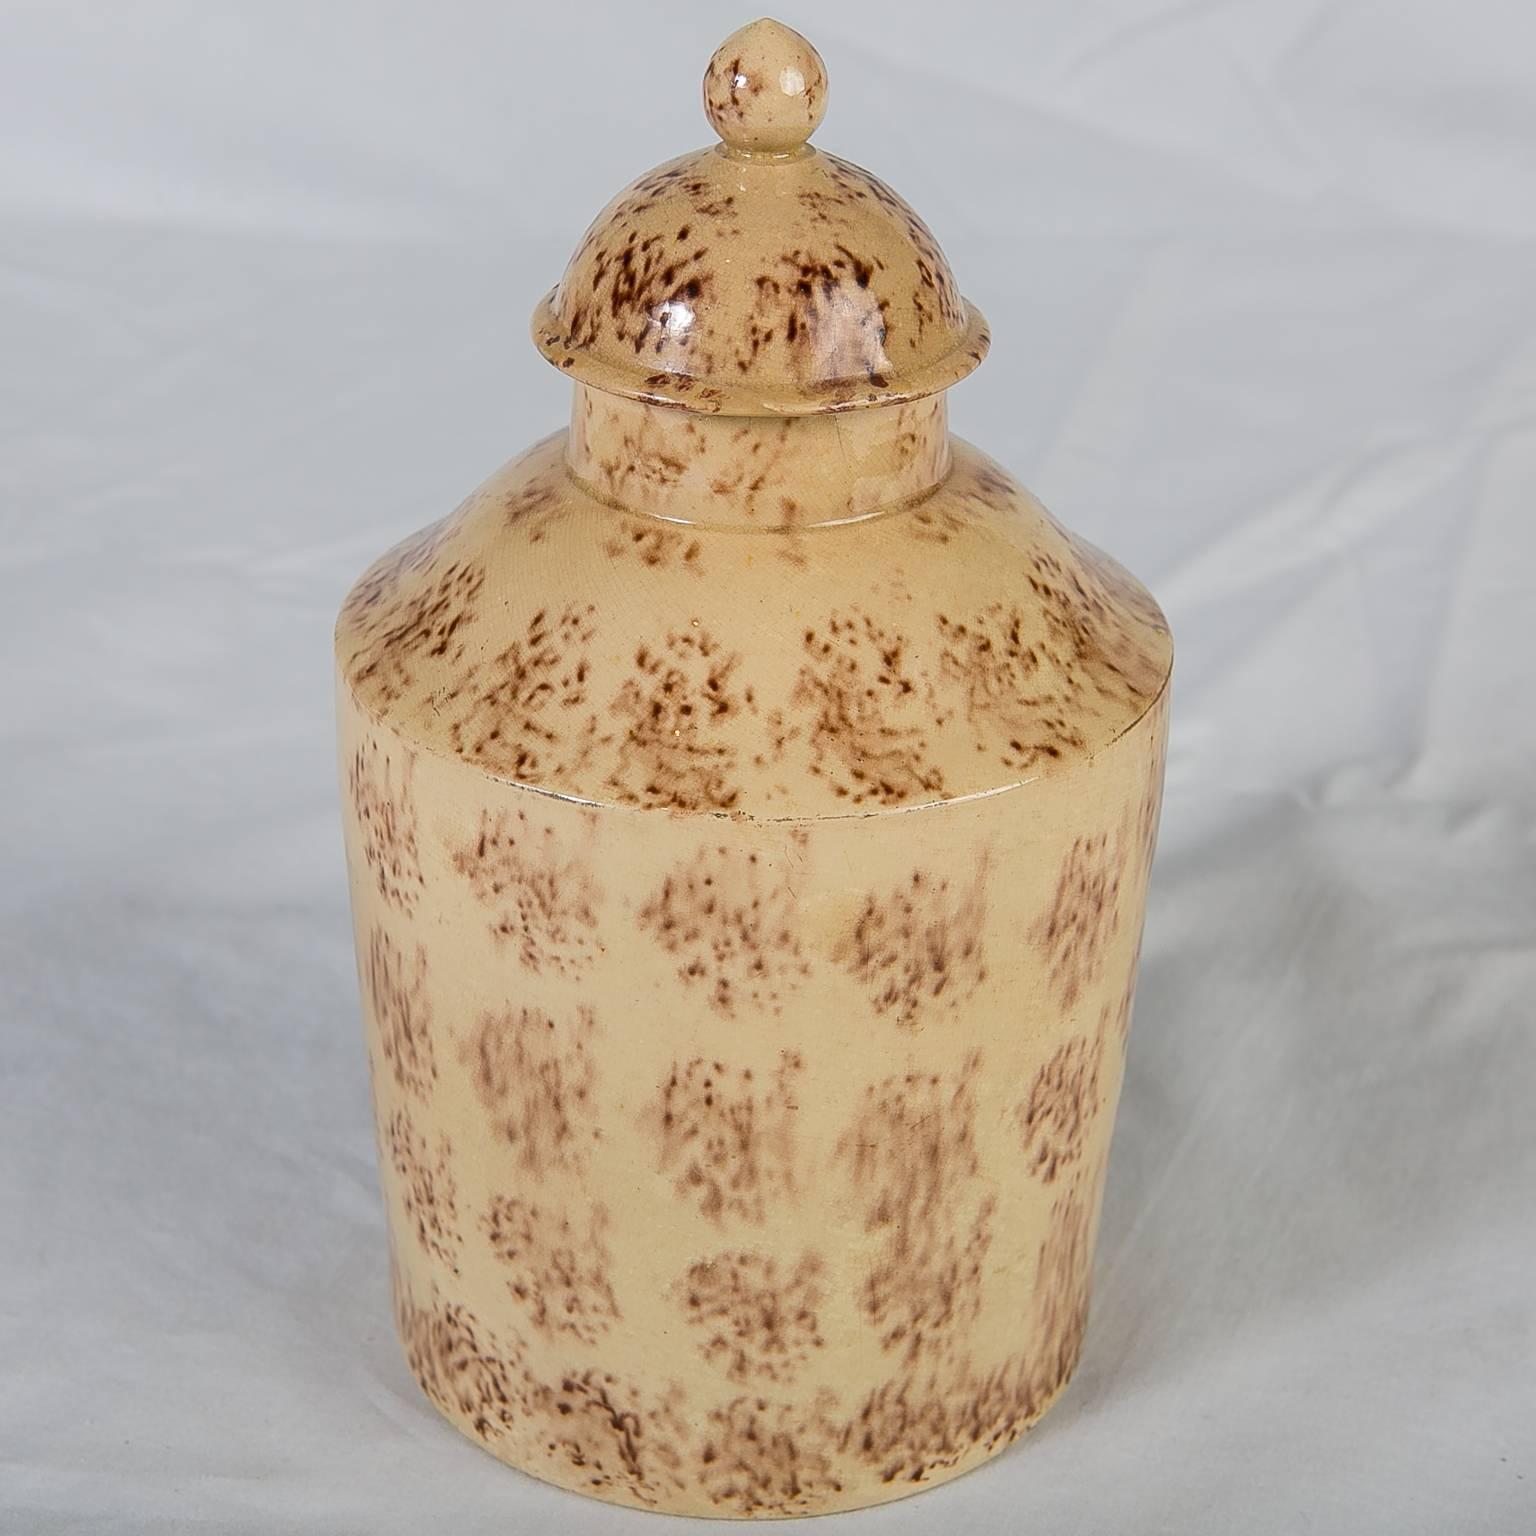 An 18th century English creamware tea caddy with sponged decoration. This early earthenware pottery was first painted beige and then decorated with sponged oxide glazes. It is a rare example from the period because most of the early decoration was